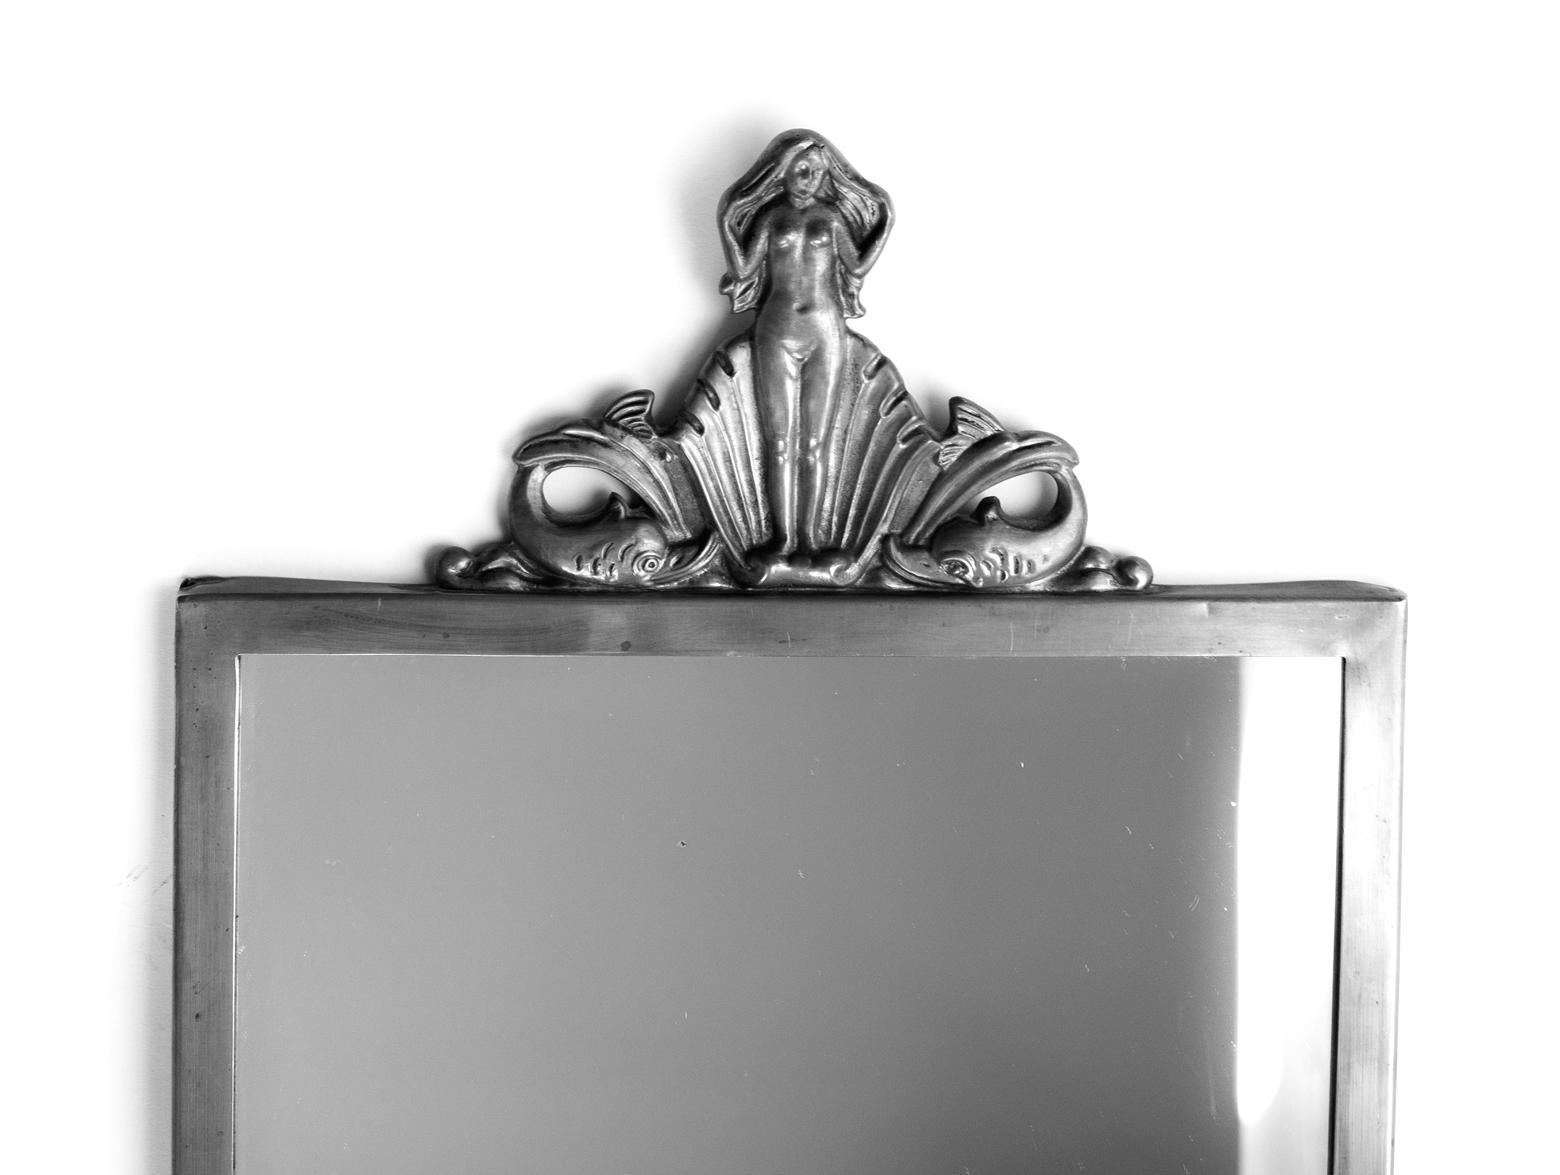 Mid-20th Century Swedish Modern Mirror by Oscar Antonsson in Pewter from Ystad Metall, Made 1931 For Sale